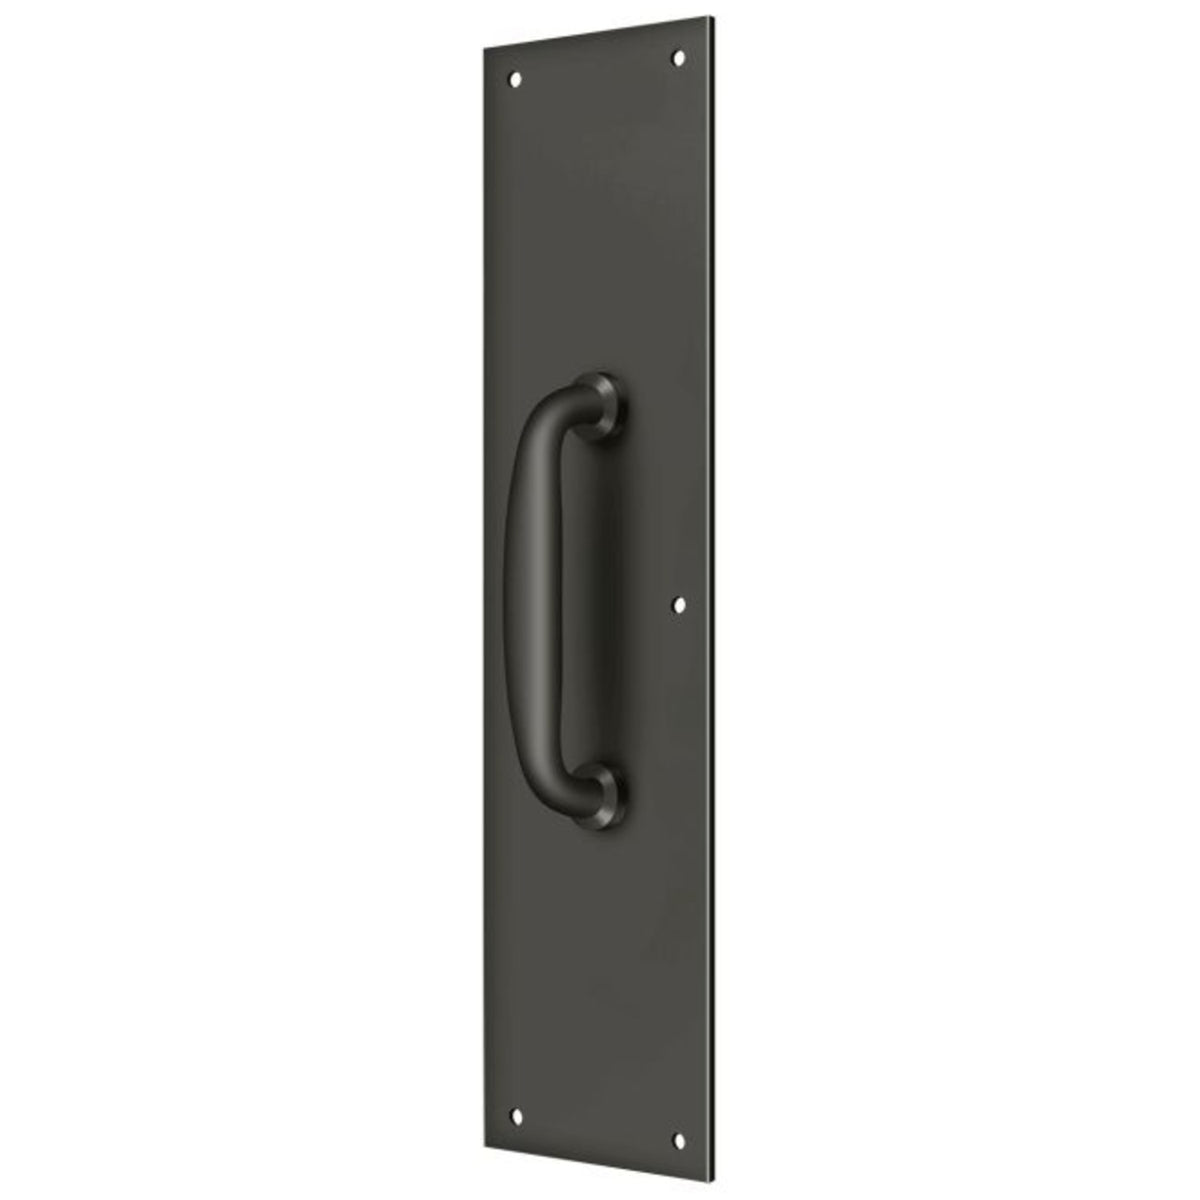 Deltana PPH55U10B Push Plate With Handle, Oil Rubbed Bronze